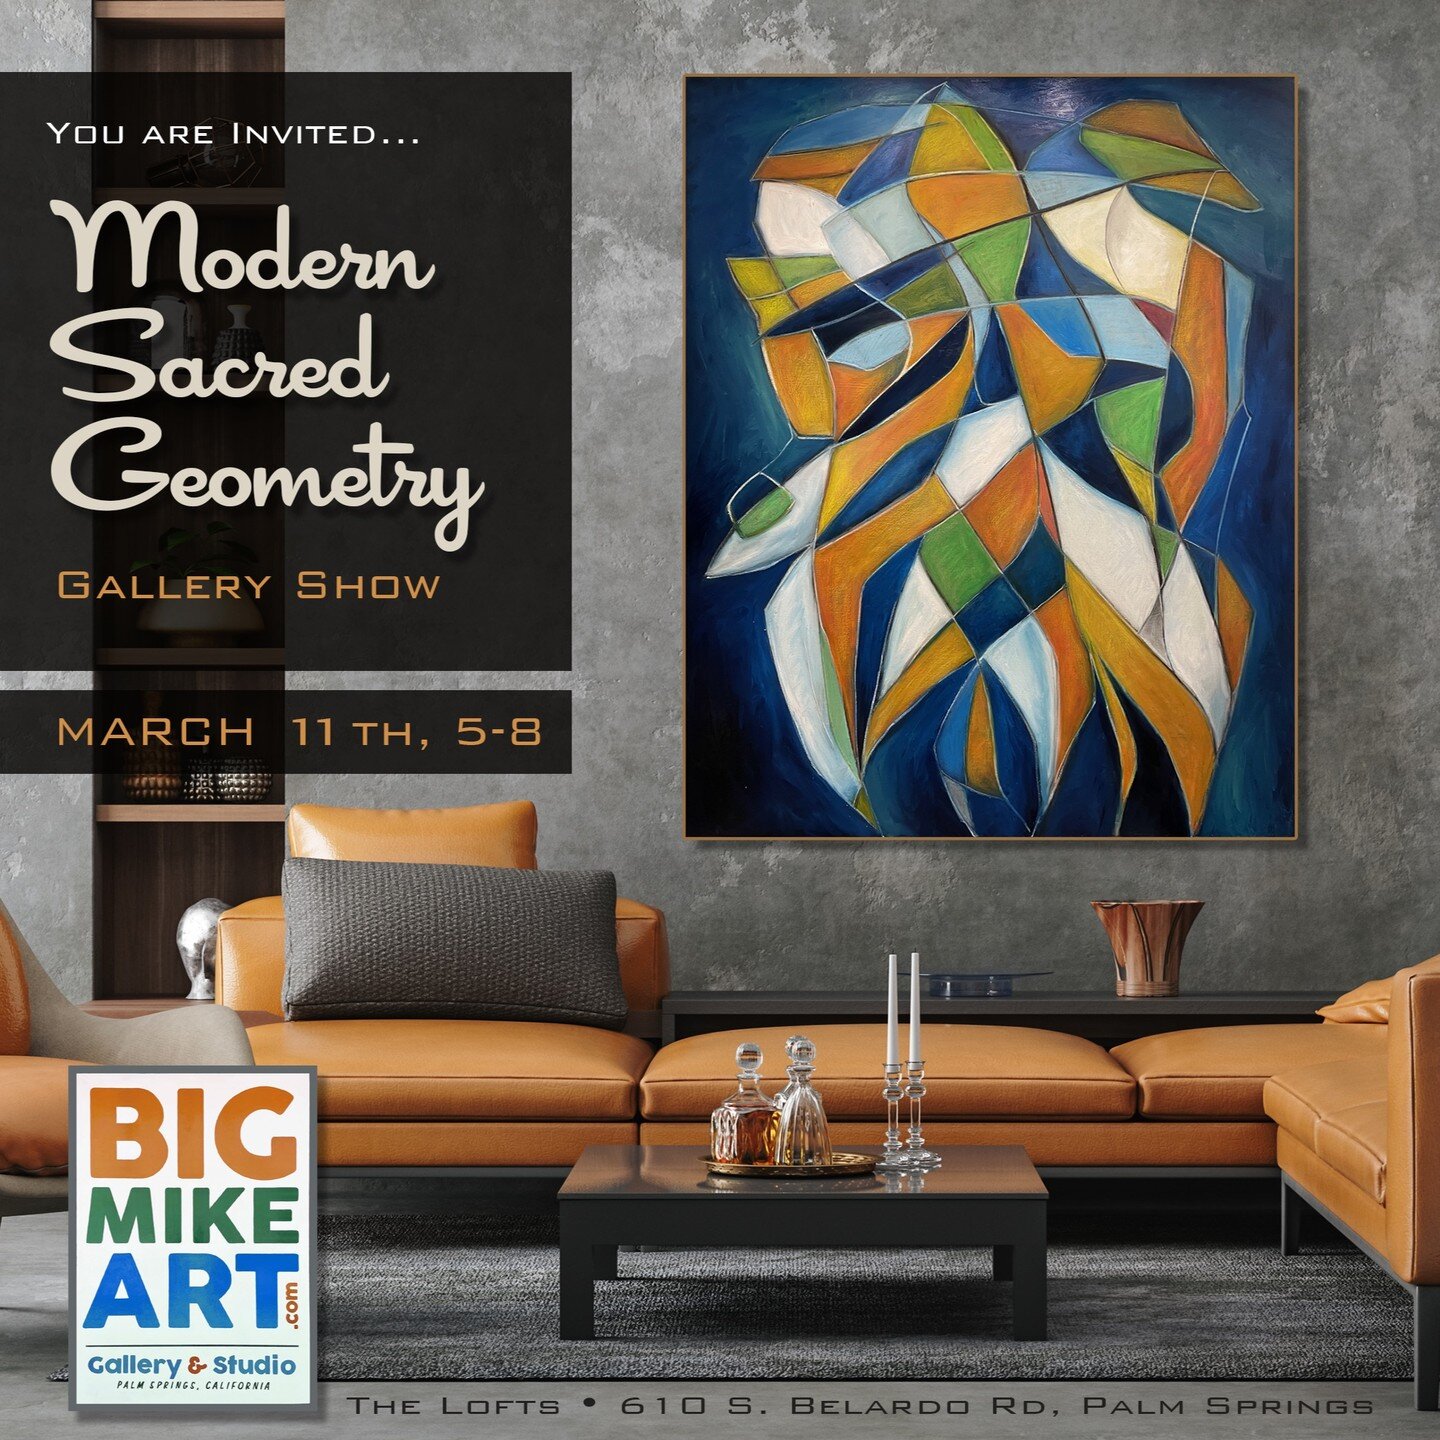 You are invited...
Big Mike Art
Modern Sacred Geometry
Gallery Show

March 11th, 5-8p
See you soon Modsters.

The Lofts @ Sun Center
610 S. Belardo Rd., PS, CA 92264
BigMikeArt.com
____
#BigMikeArtPS
#PalmSpringsArtist
#PalmSpringsGallery
#AbstractAr